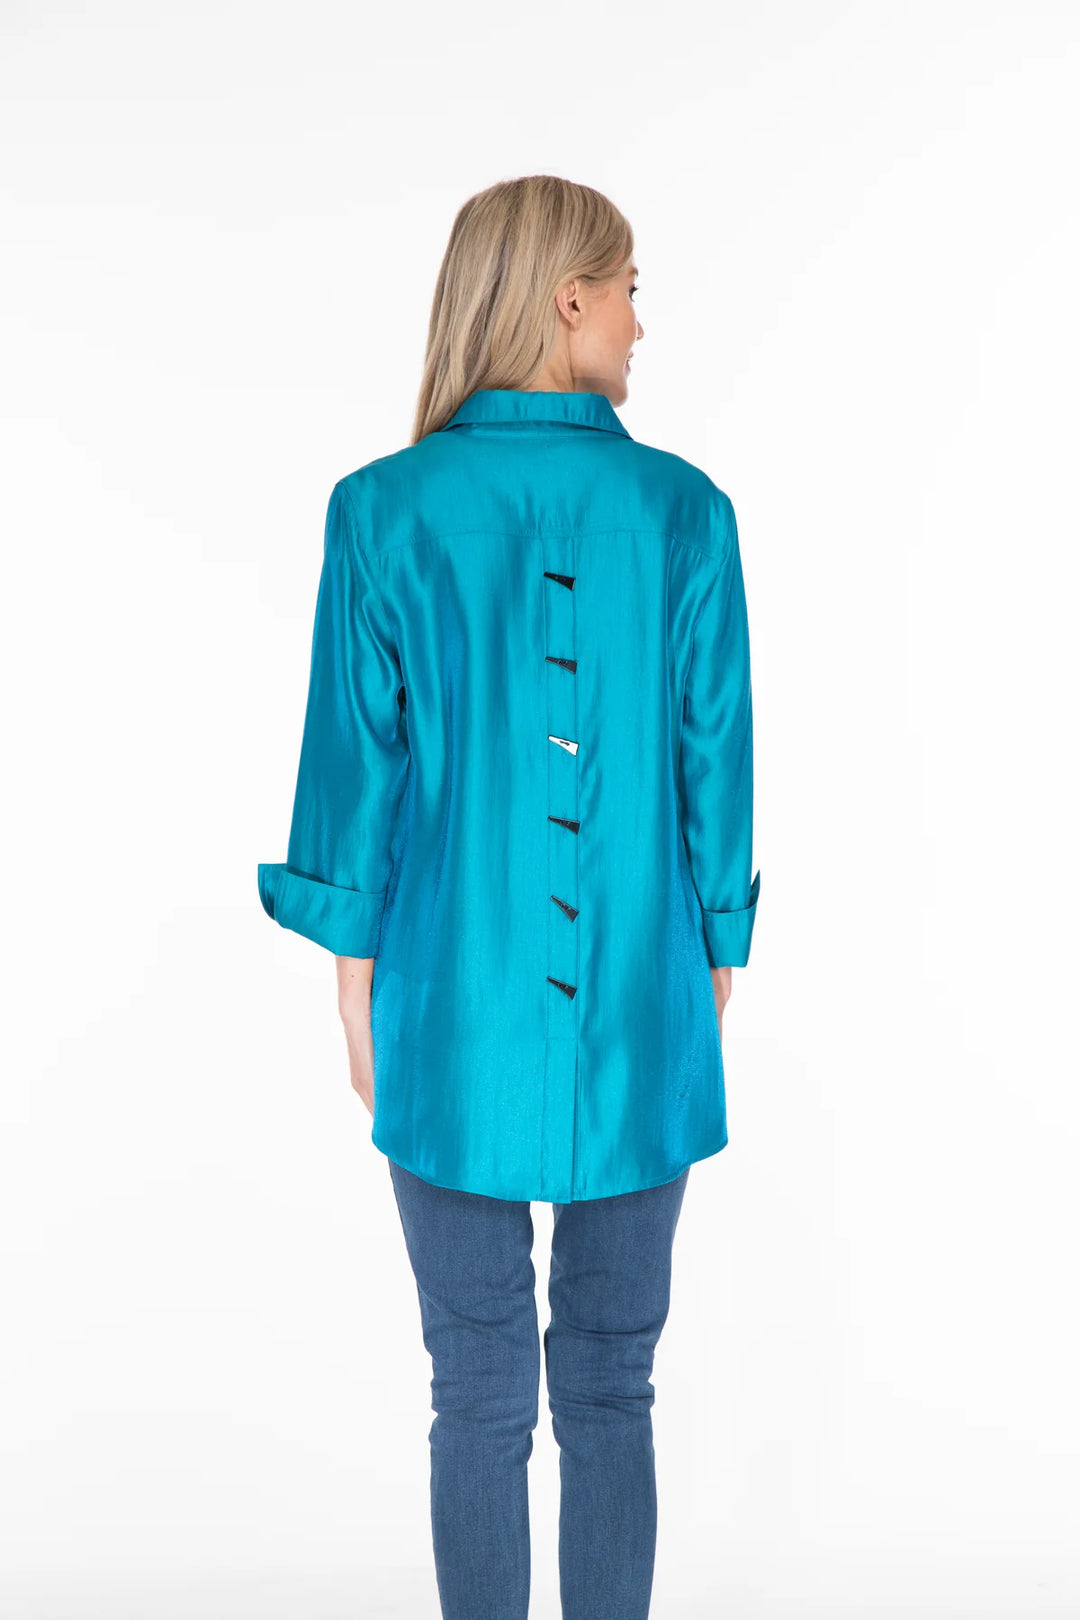 Multiples Teal Turn Up Cuff Button Top